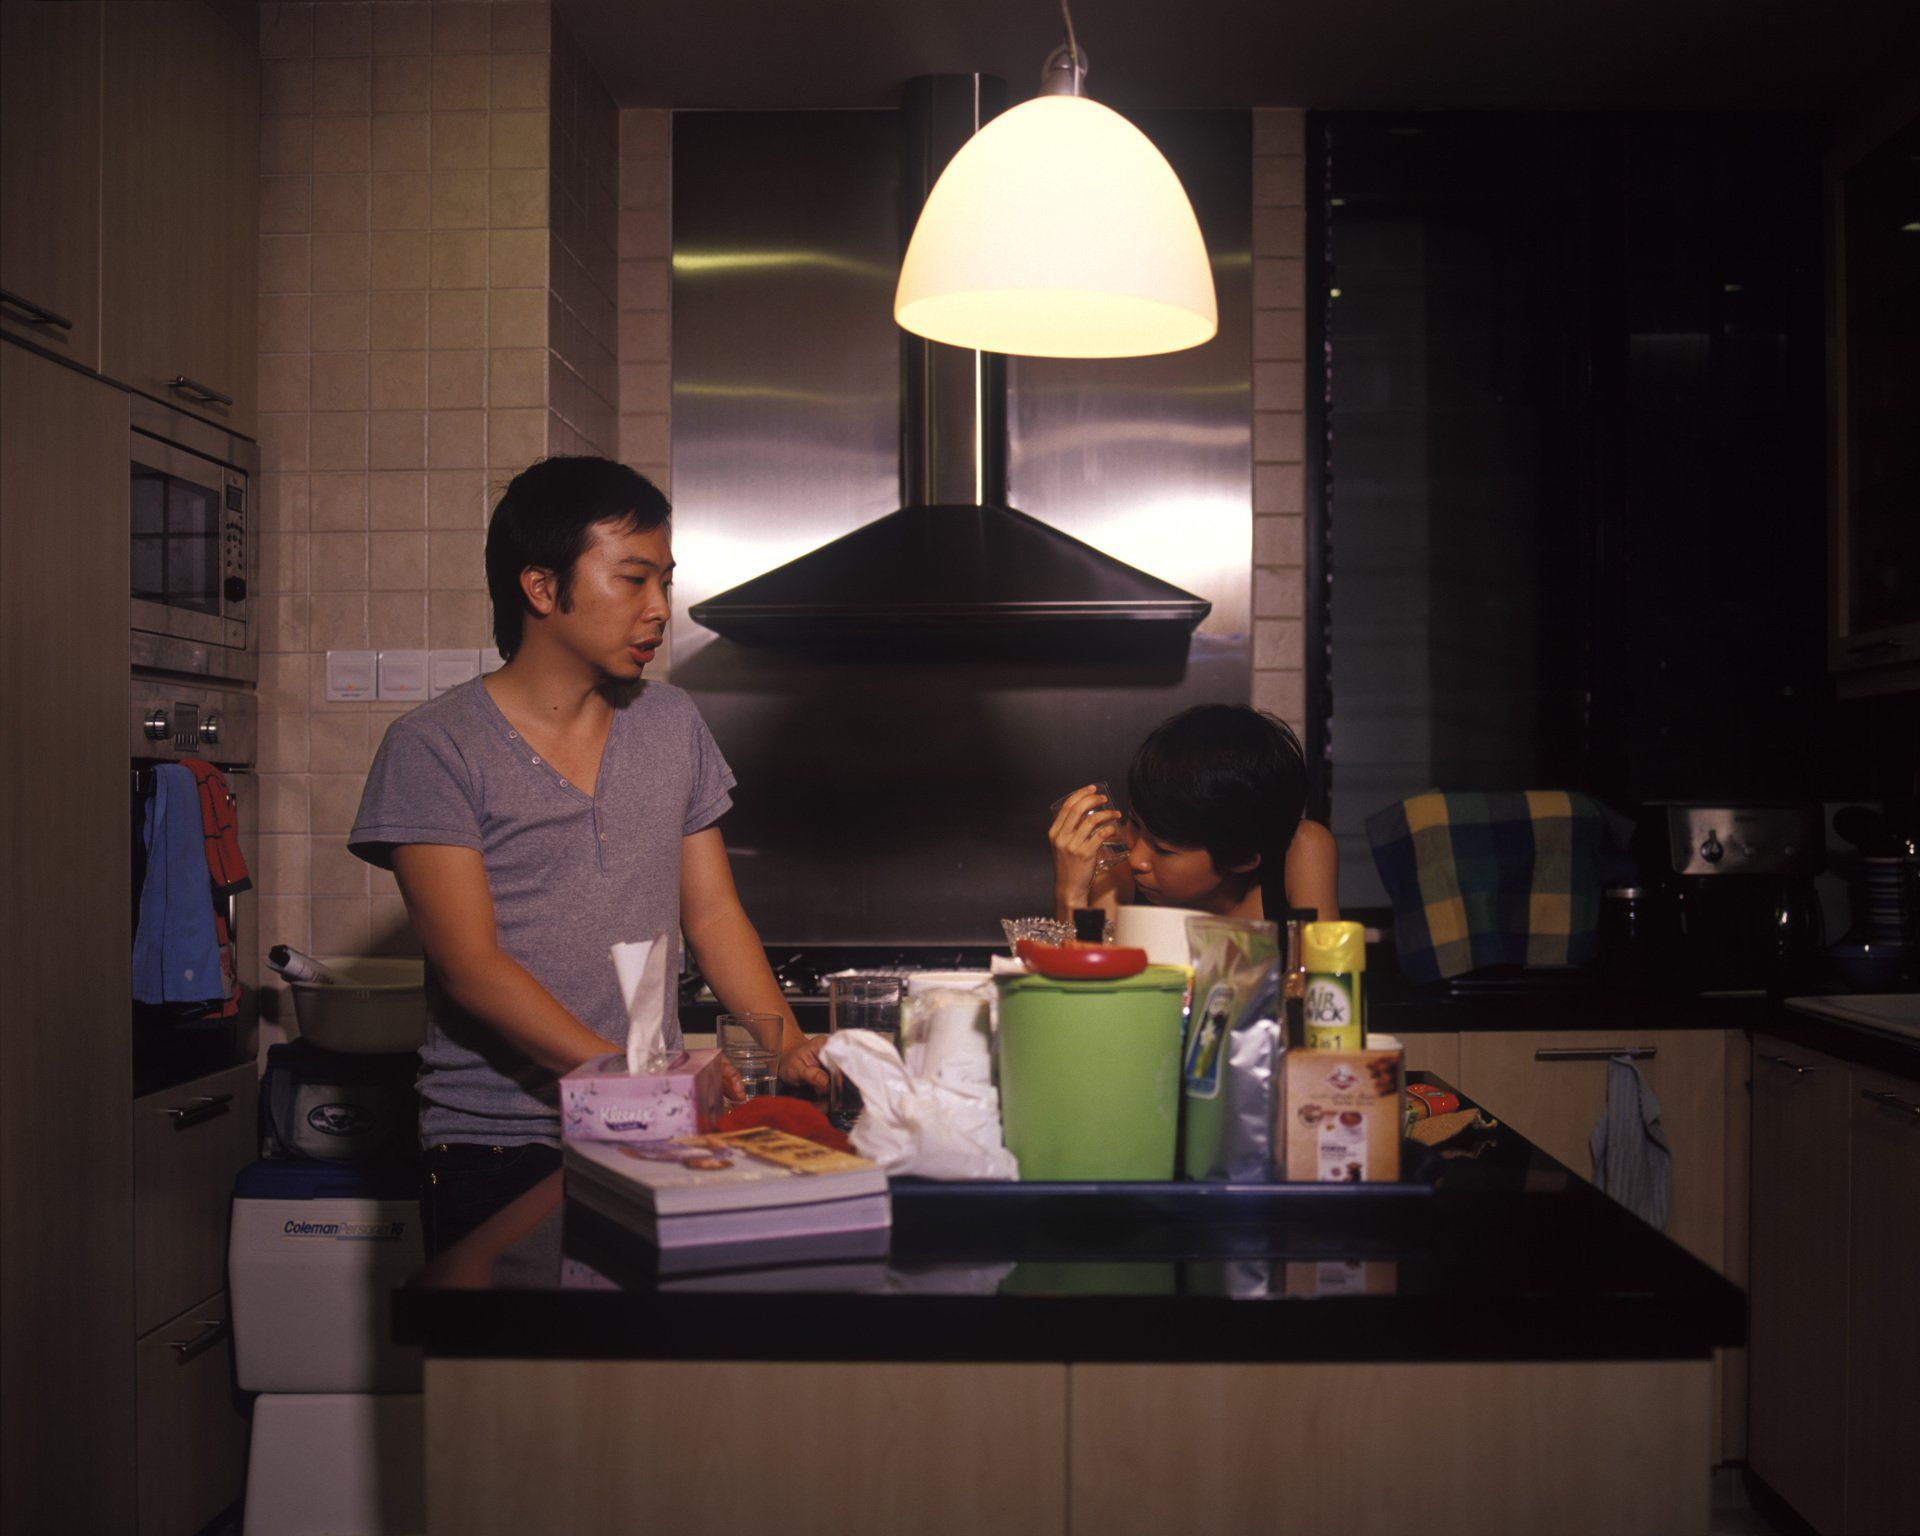 “Chris and Elsie”, from the project “Convergence,” Singapore, 2010. 80x100cm